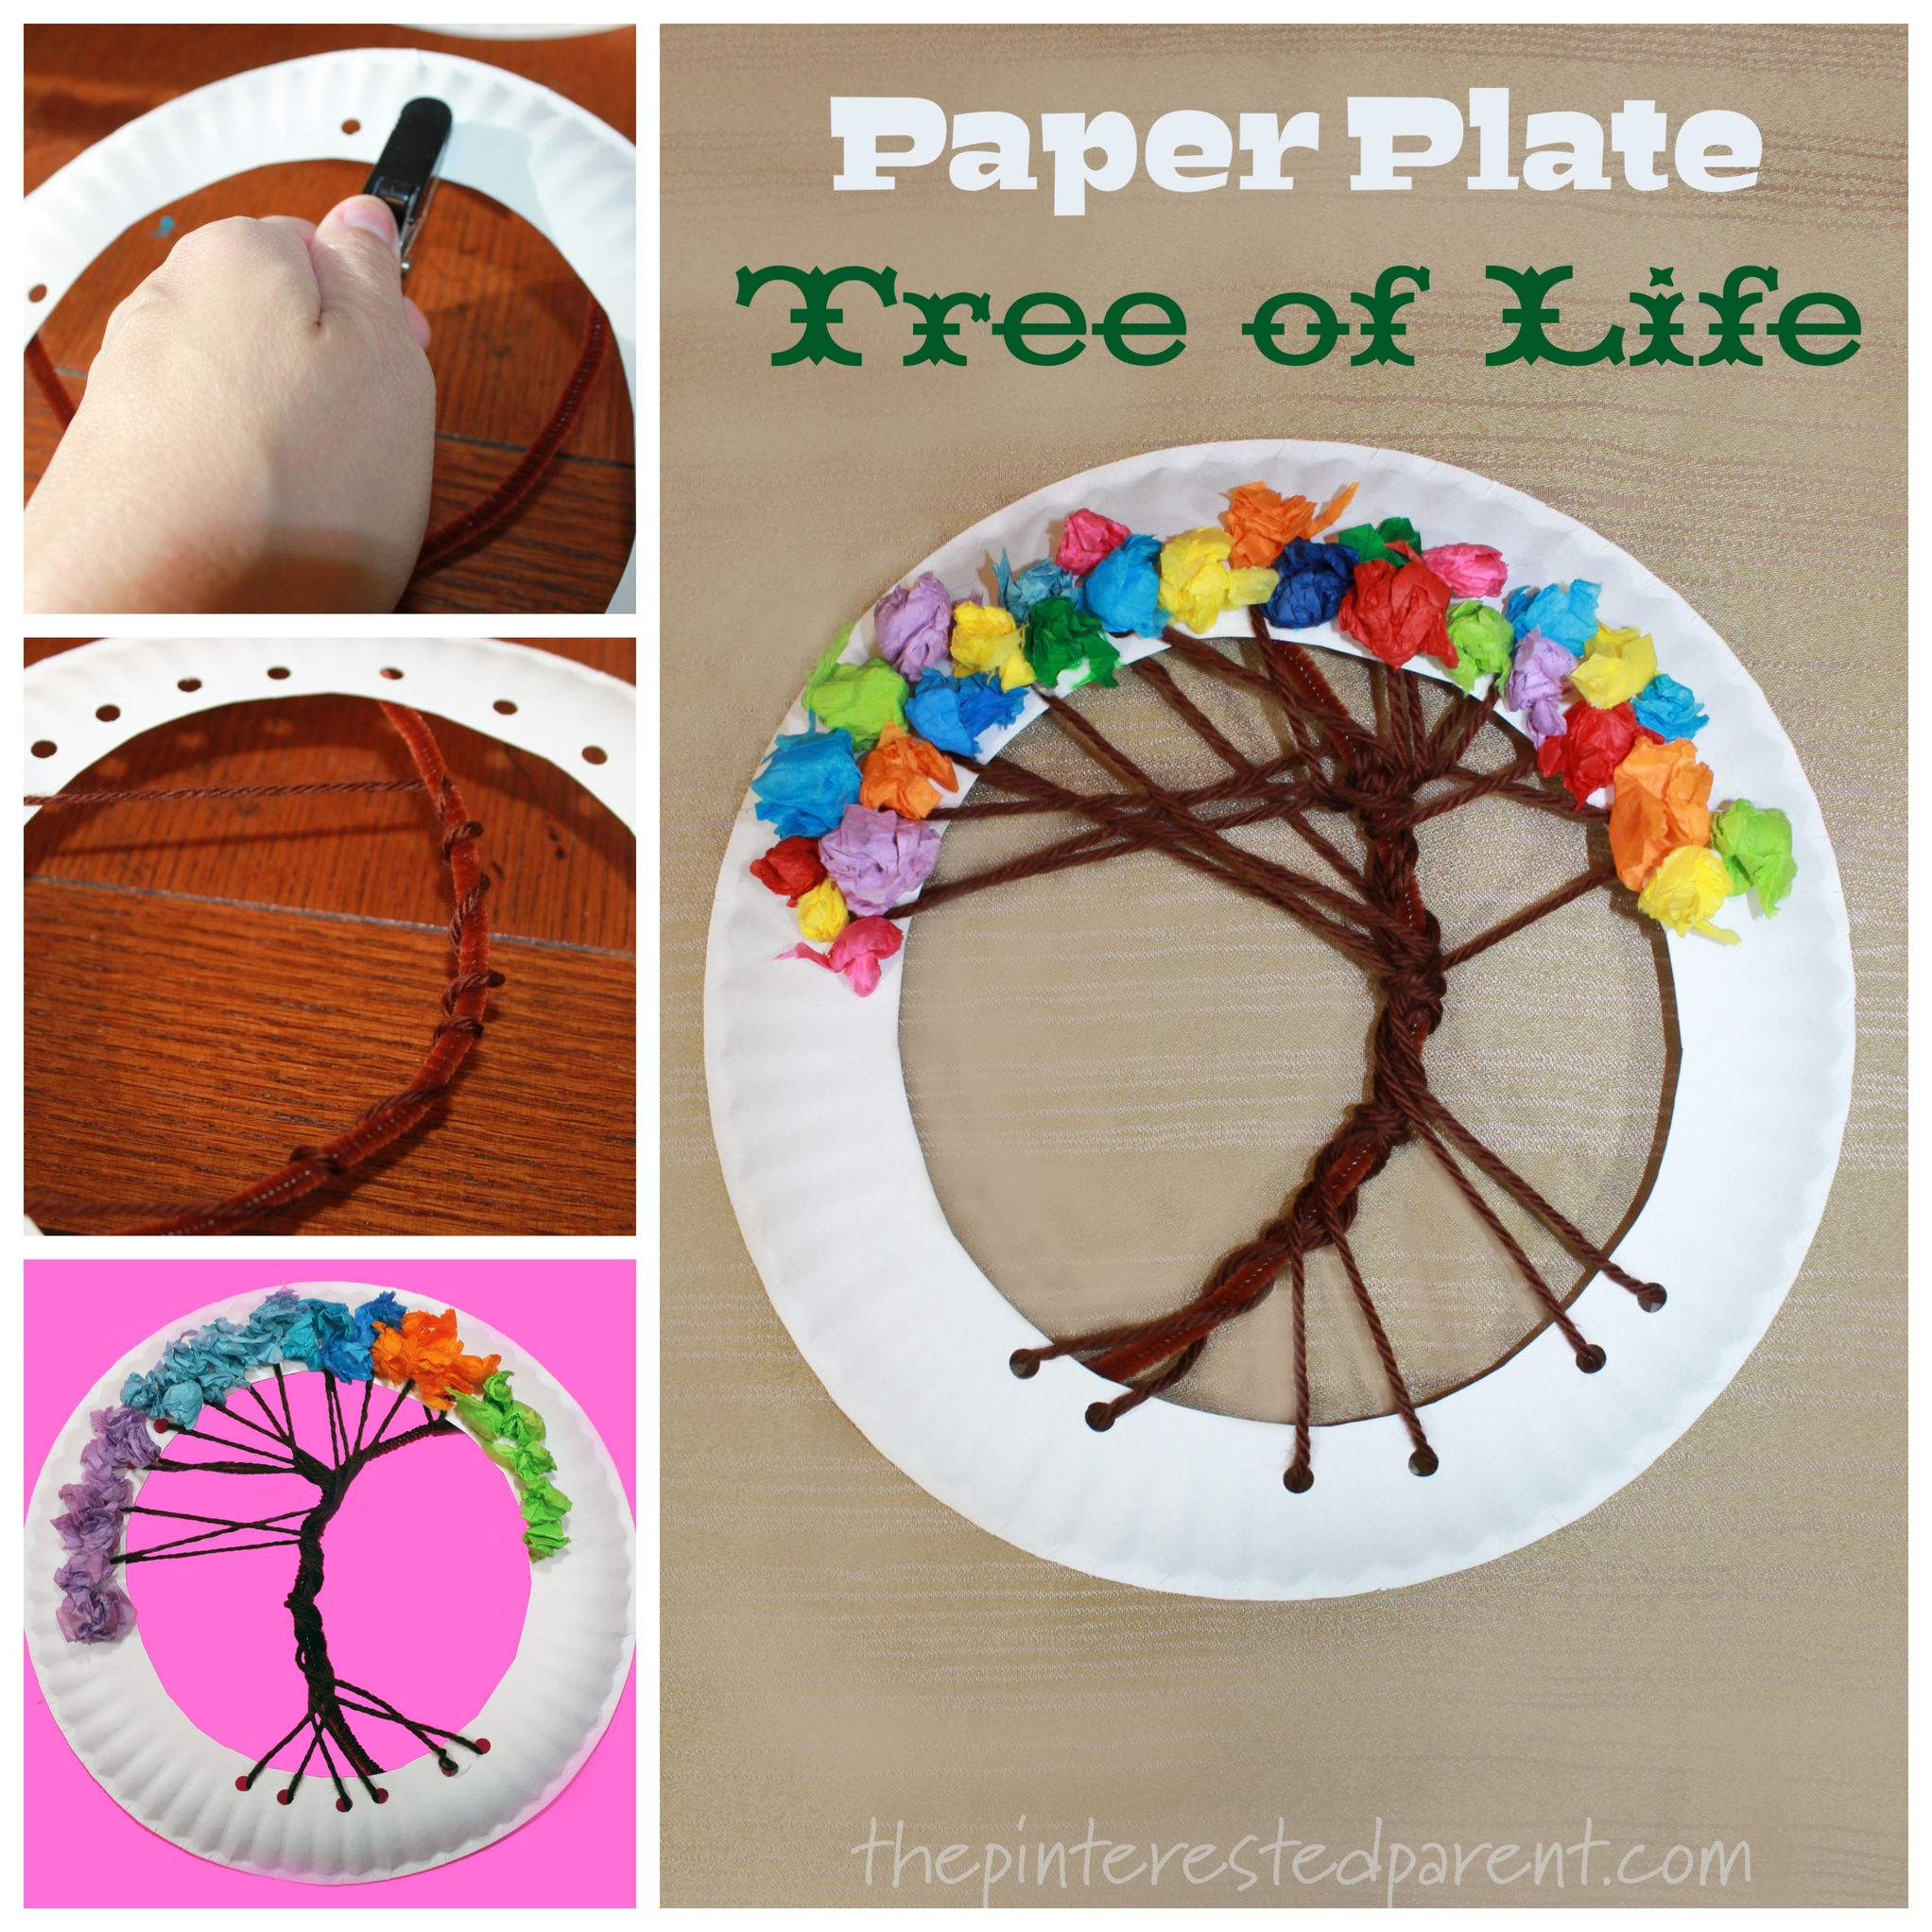 Paper Plate Tree of Life Lacing Craft. Arts and crafts for kids. Yarn and tissue paper